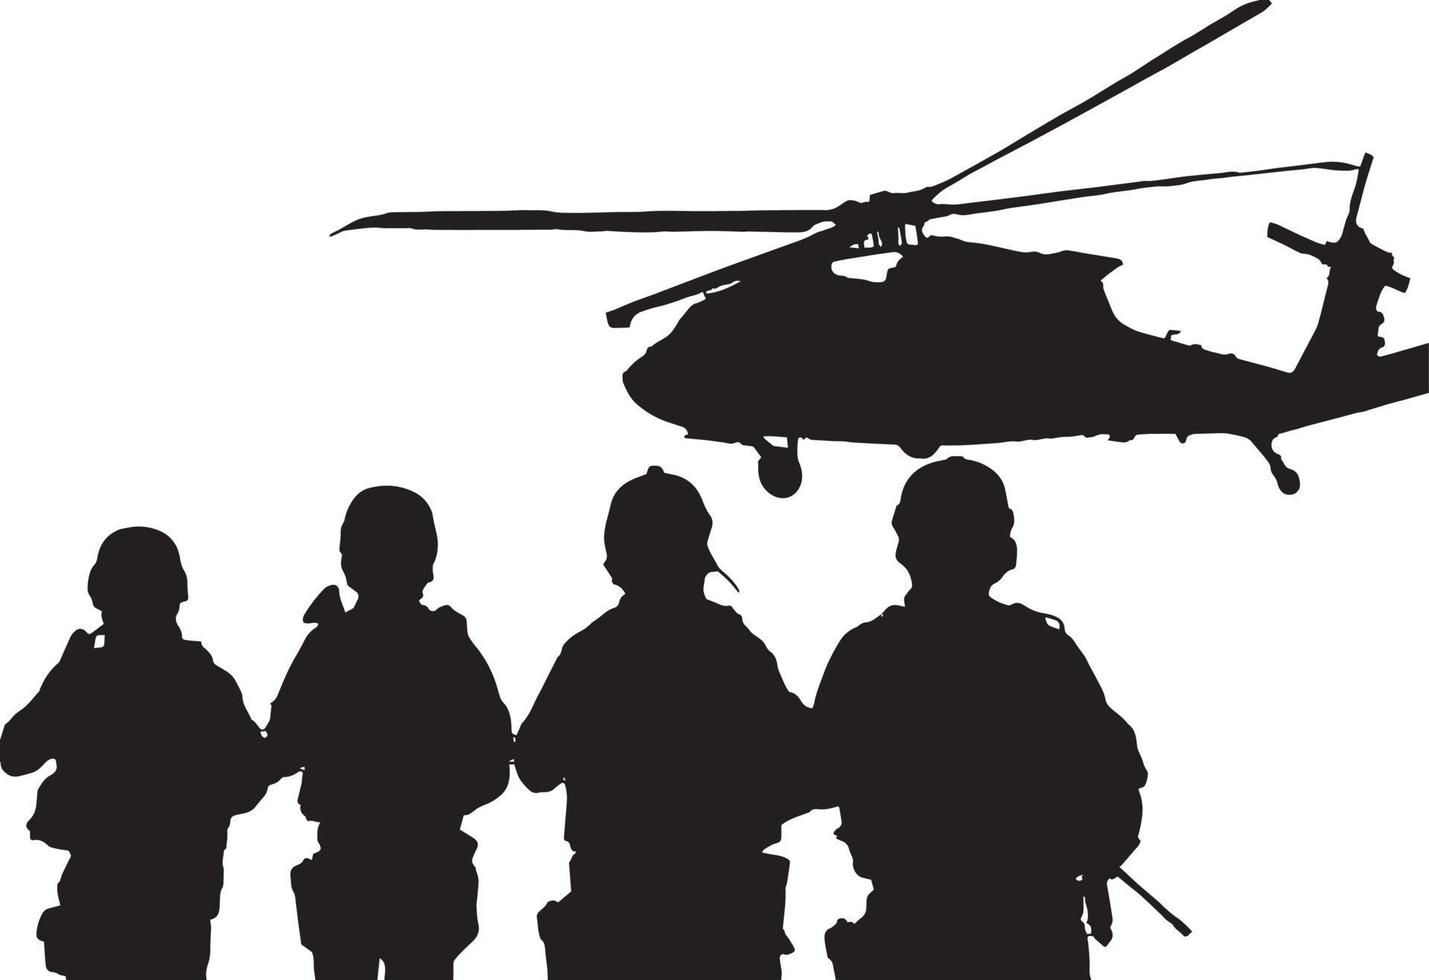 Set of military silhouettes, military vector illustration, Army soldiers, Military silhouettes background.